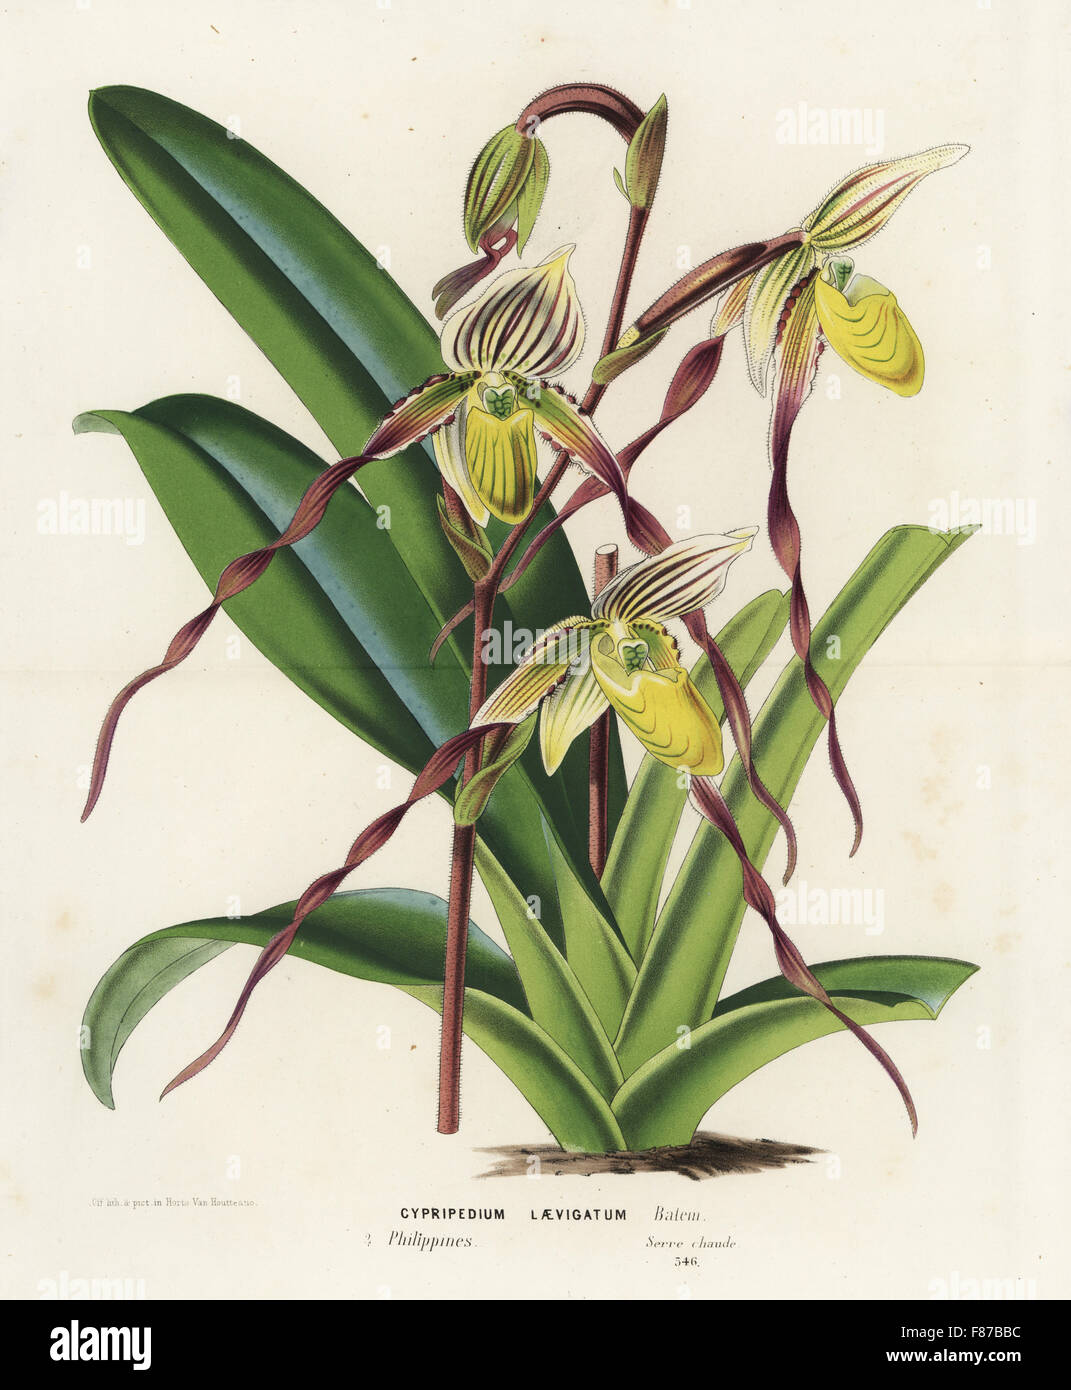 Paphiopedilum philippinense orchid (Cypripedium laevigatum). Handcoloured lithograph from Louis van Houtte and Charles Lemaire's Flowers of the Gardens and Hothouses of Europe, Flore des Serres et des Jardins de l'Europe, Ghent, Belgium, 1867-1868. Stock Photo